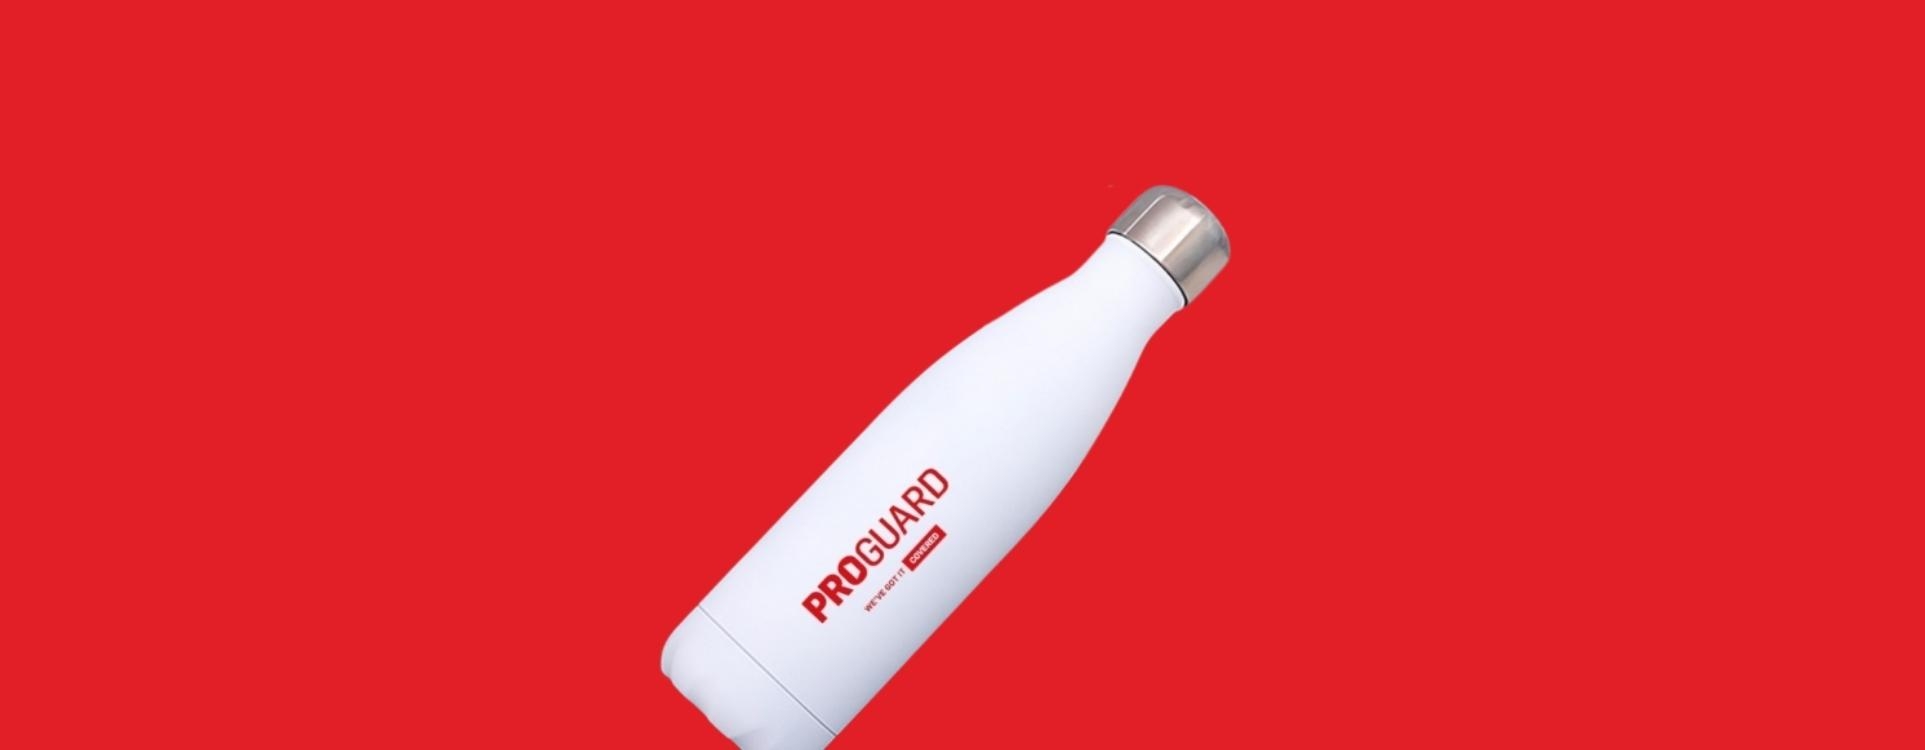 FREE ECO-FRIENDLY WATER BOTTLE Spend Over £500 Ex VAT - Just add product code PRO(BOTTLE) to your basket and enter code ECOBOTTLE   